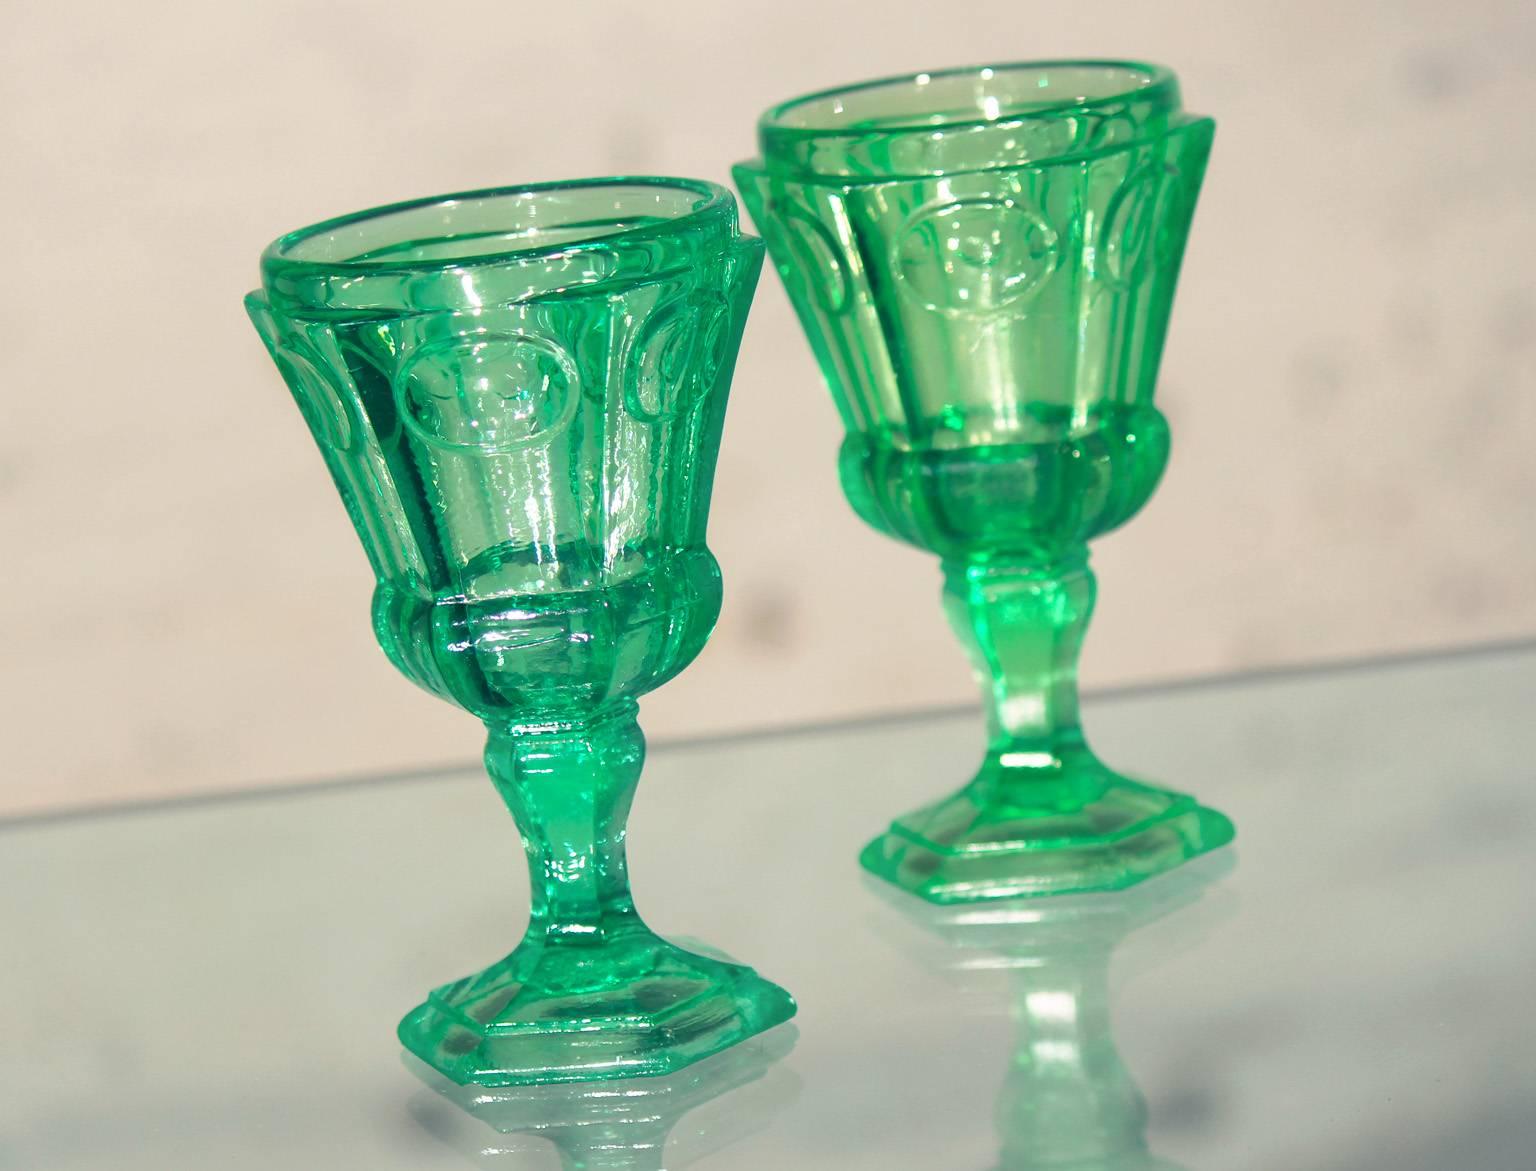 Gorgeous pair of Russian hexagonal goblets. Signed. Possibly Fedorovsky Brothers Glass Factory in Sudogda, Russia or Maltsov. Wonderful shade of green in wonderful antique condition. Please see long description for details.

Beautiful pair of